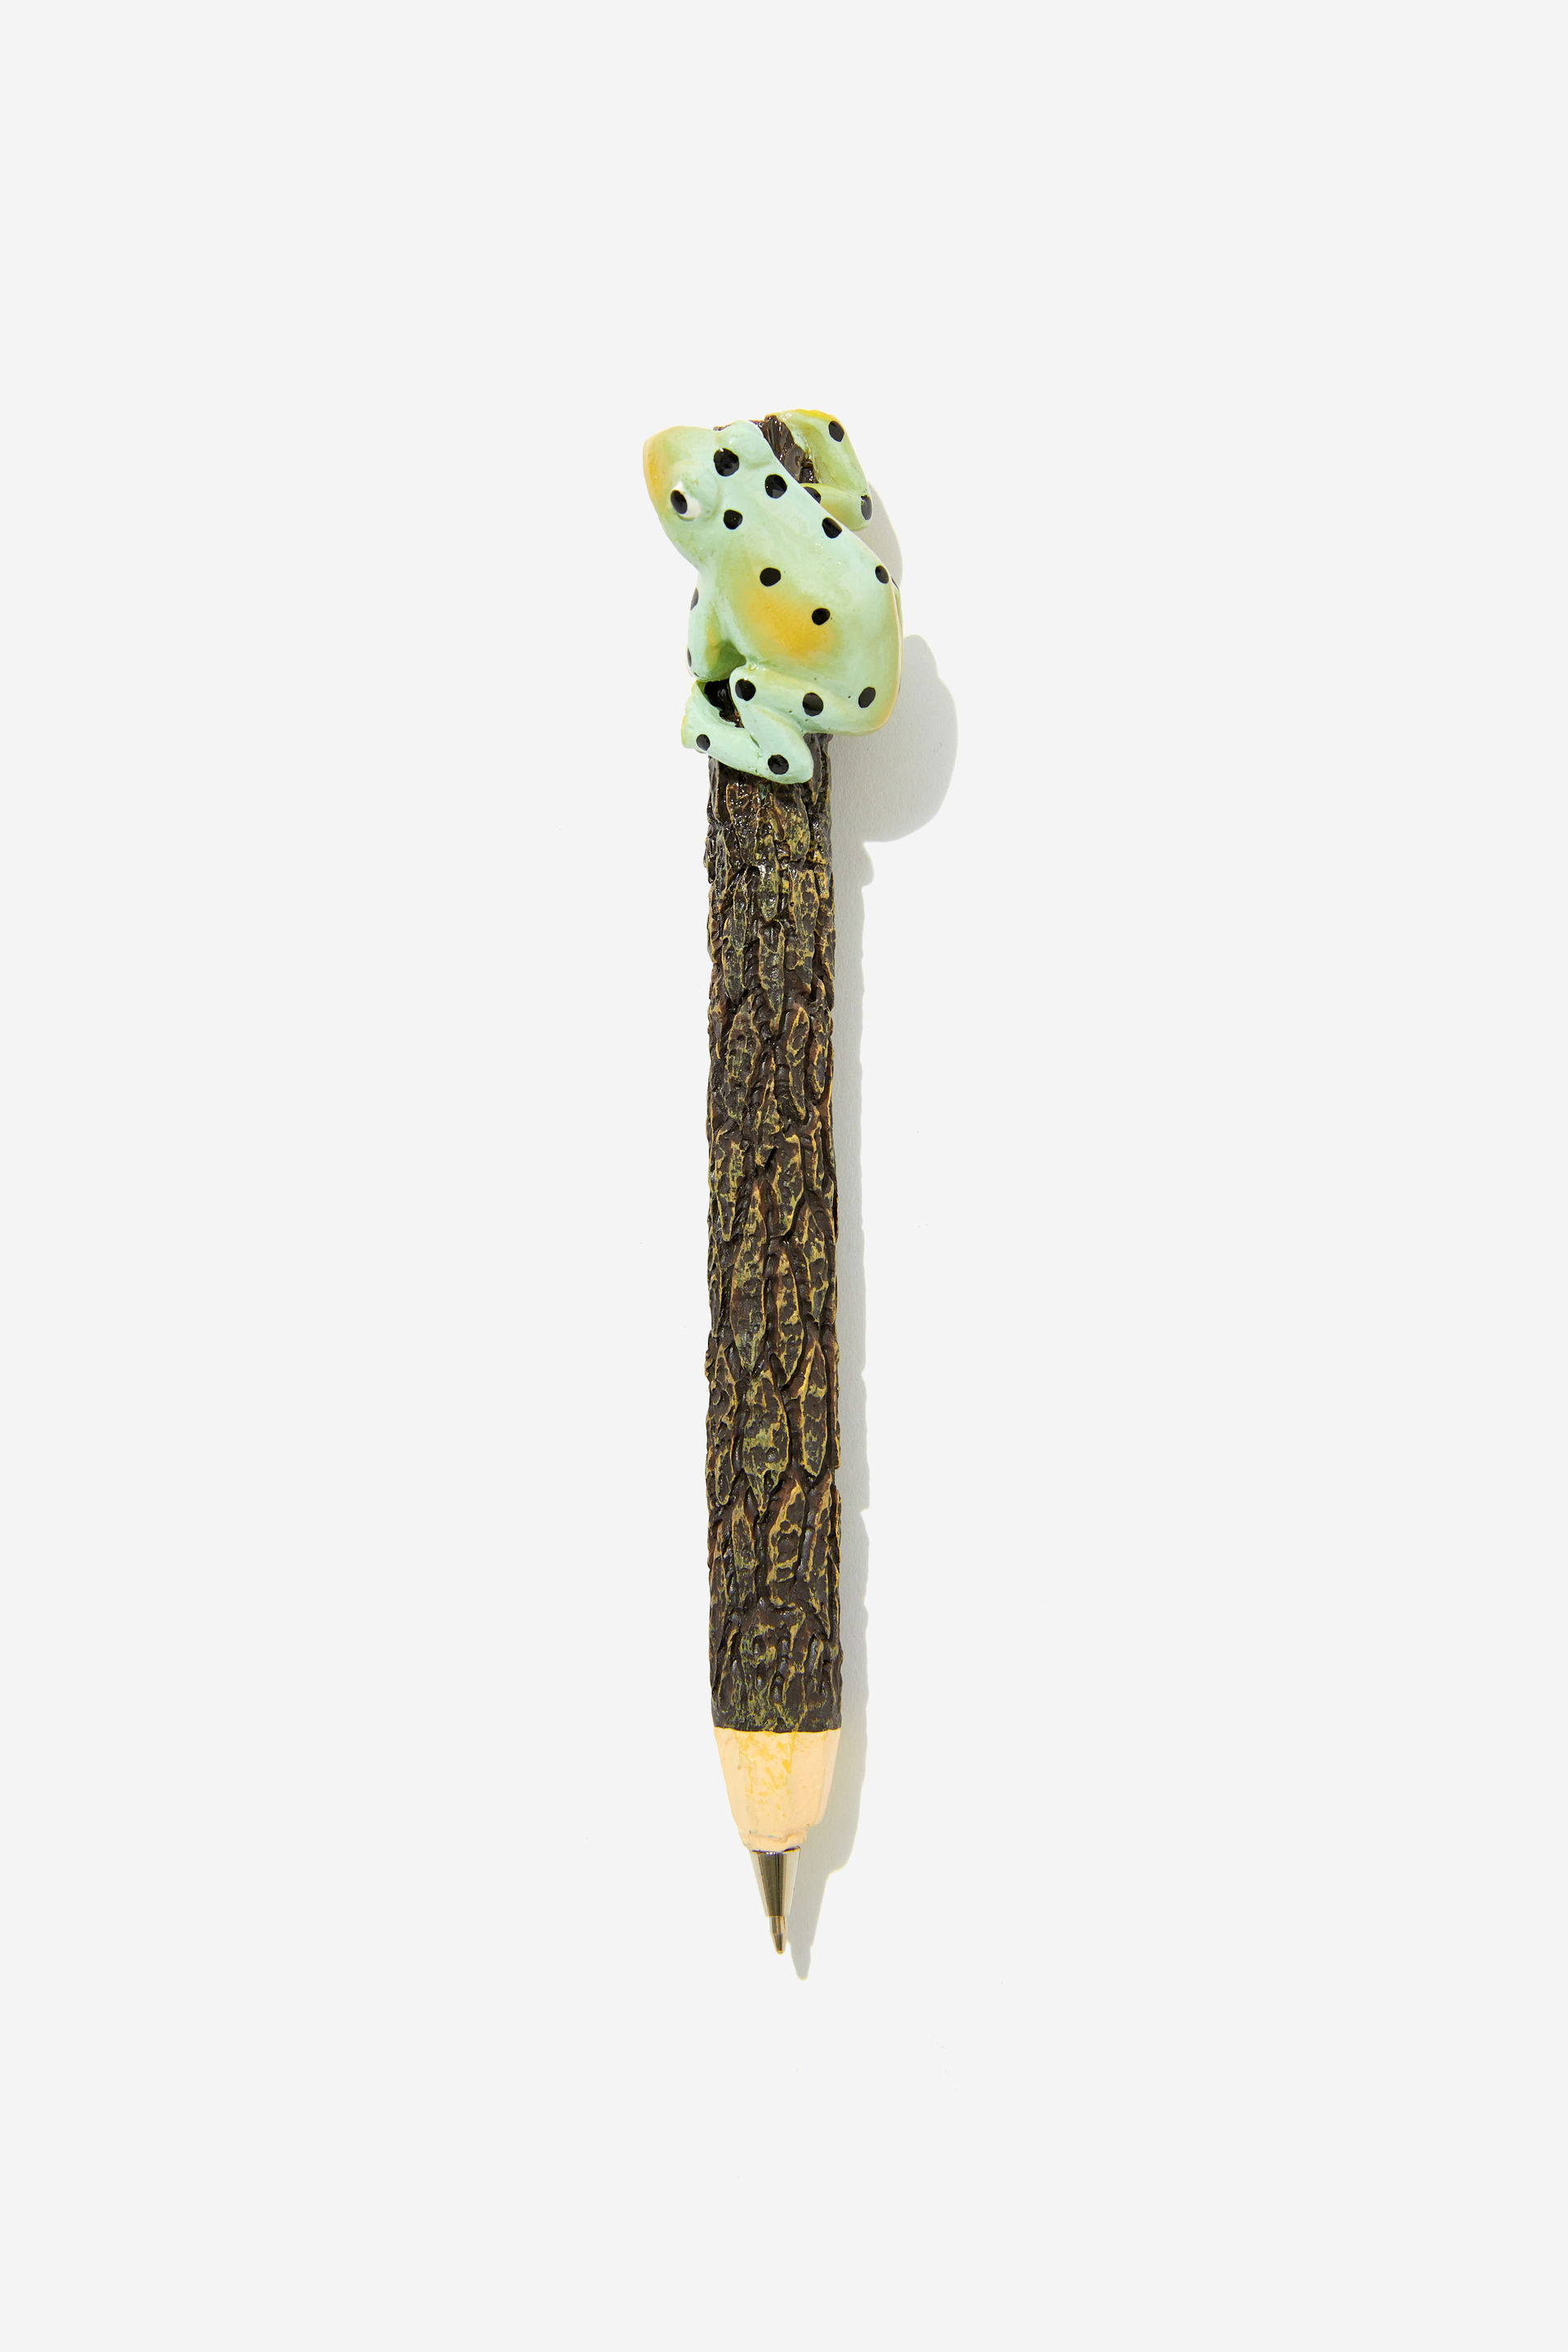 Typo - The Novelty Pen - Frog on the log smoke green